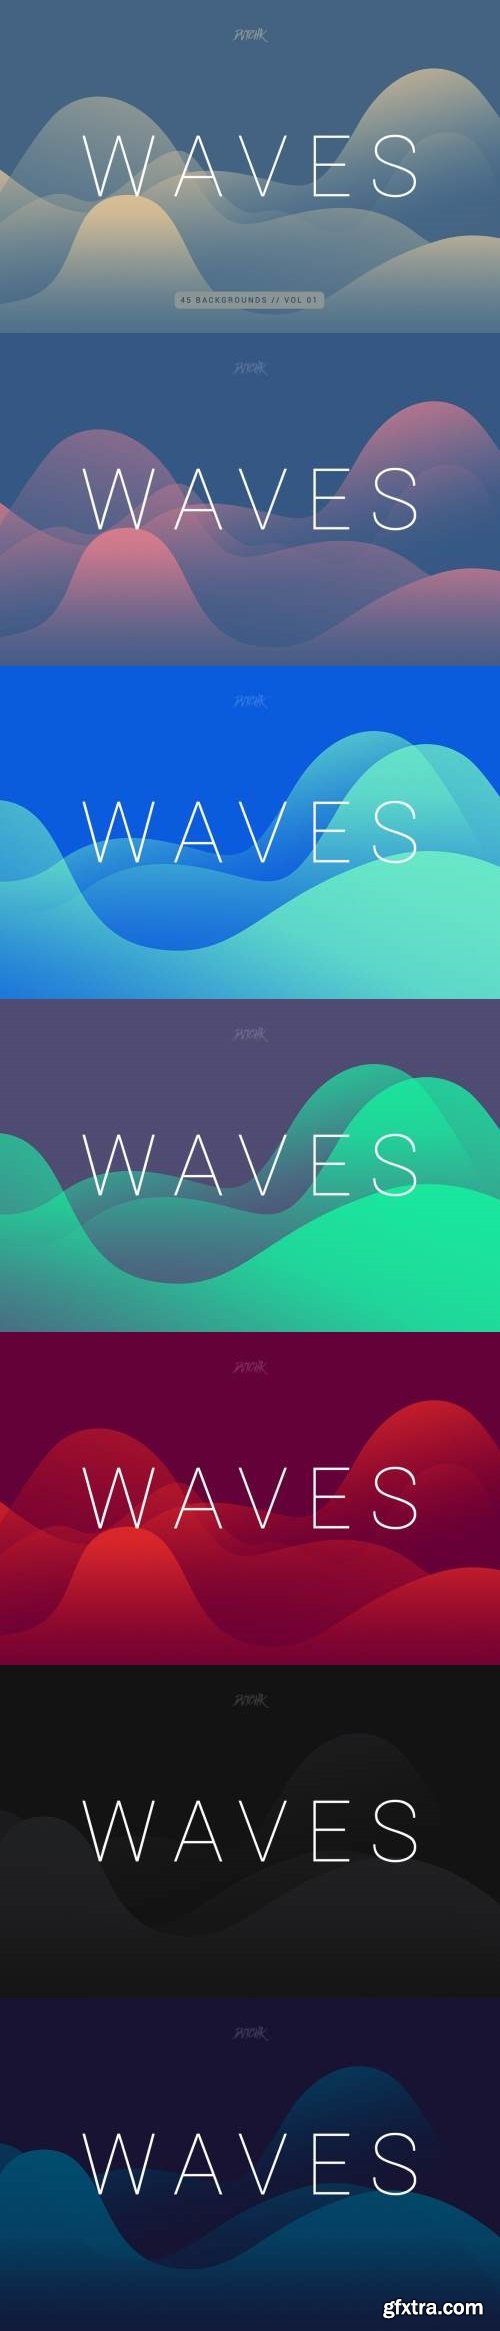 Waves | Smooth Colorful Backgrounds | Vol. 01